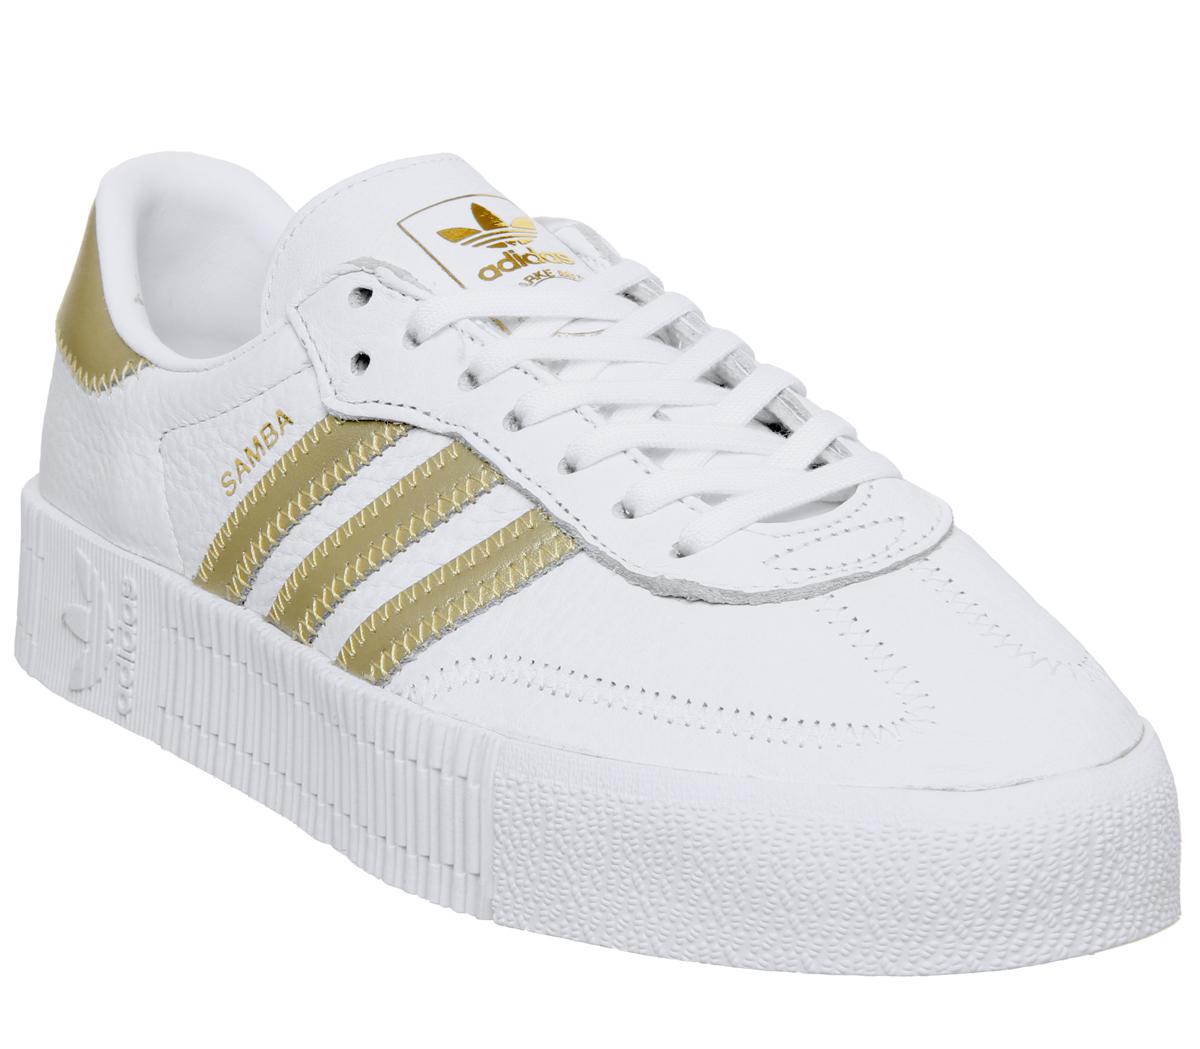 adidas trainers gold stripes